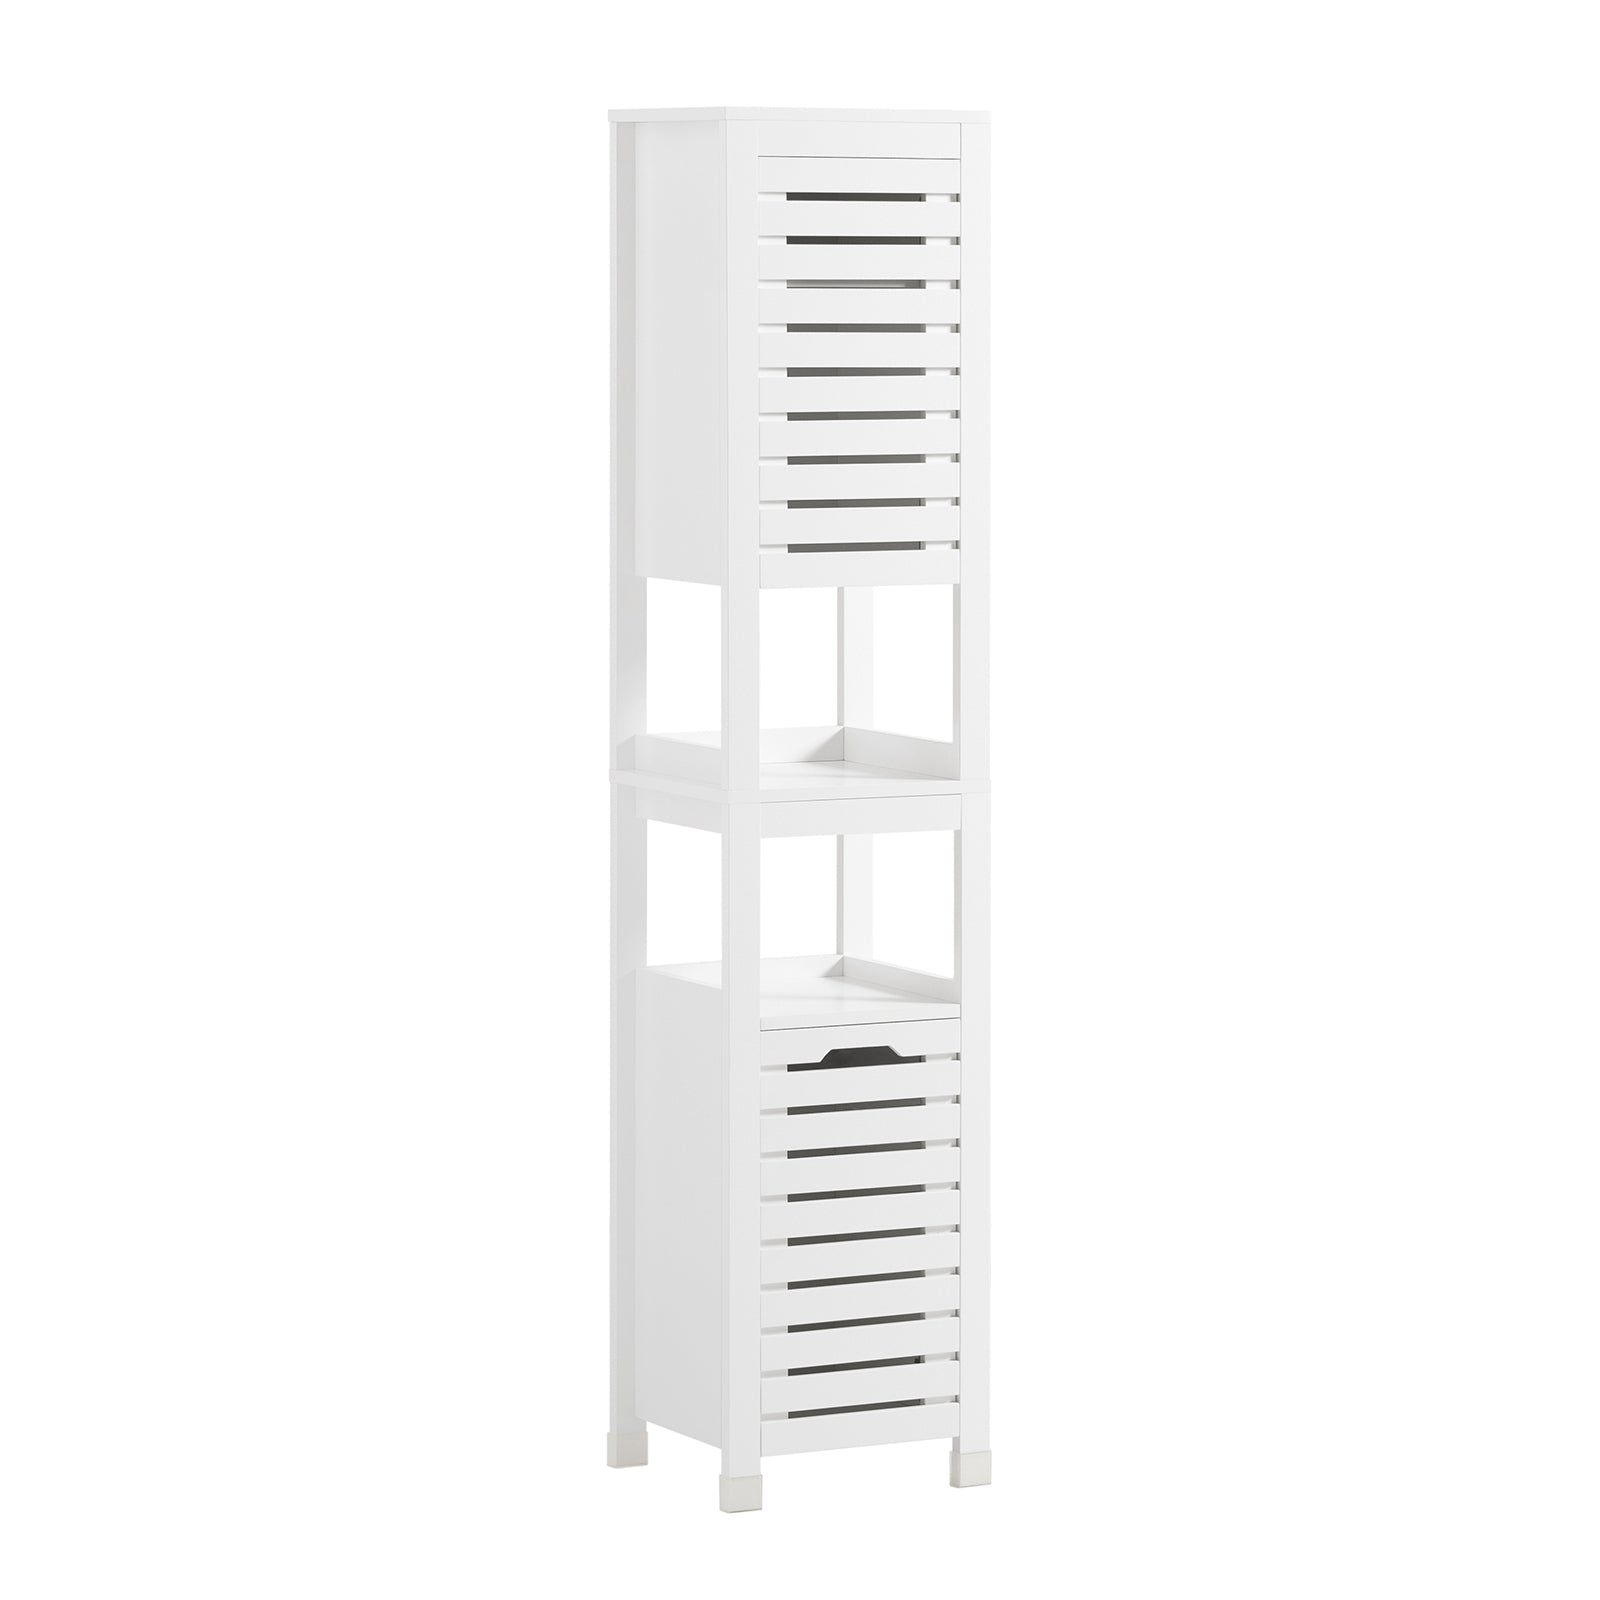 SoBuy BZR59-W,Tall Bathroom Cabinet Cupboard,Storage Cabinet with 2 Slatted Doors and 2 Shelves, H161cm